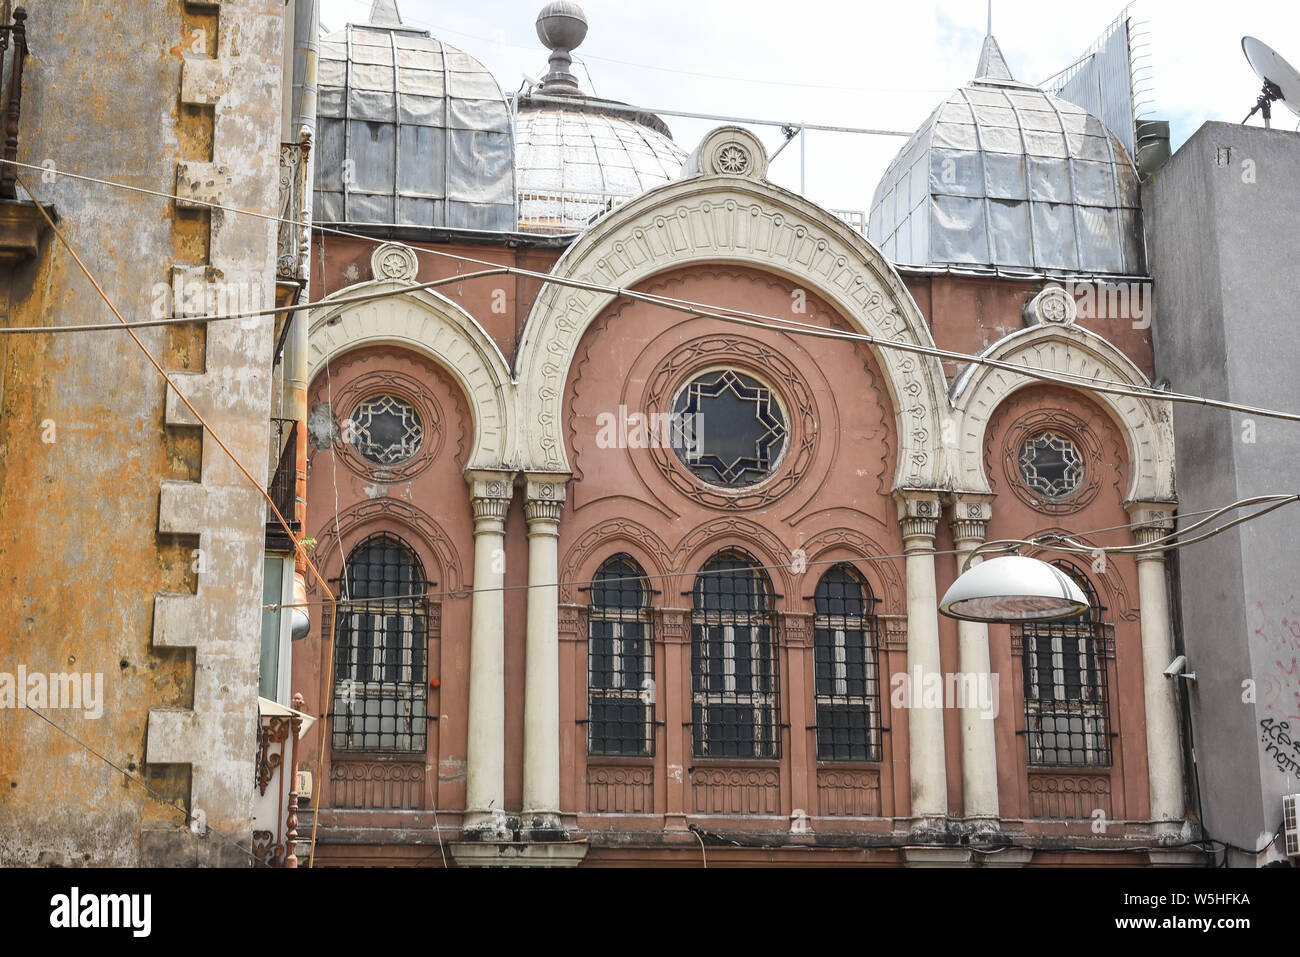 Exterior view of Ashkenazi Synagogue was founded by Jews of Austrian origin in 1900 and located in Beyoglu,Istanbul,Turkey.25 July 2019 Stock Photo